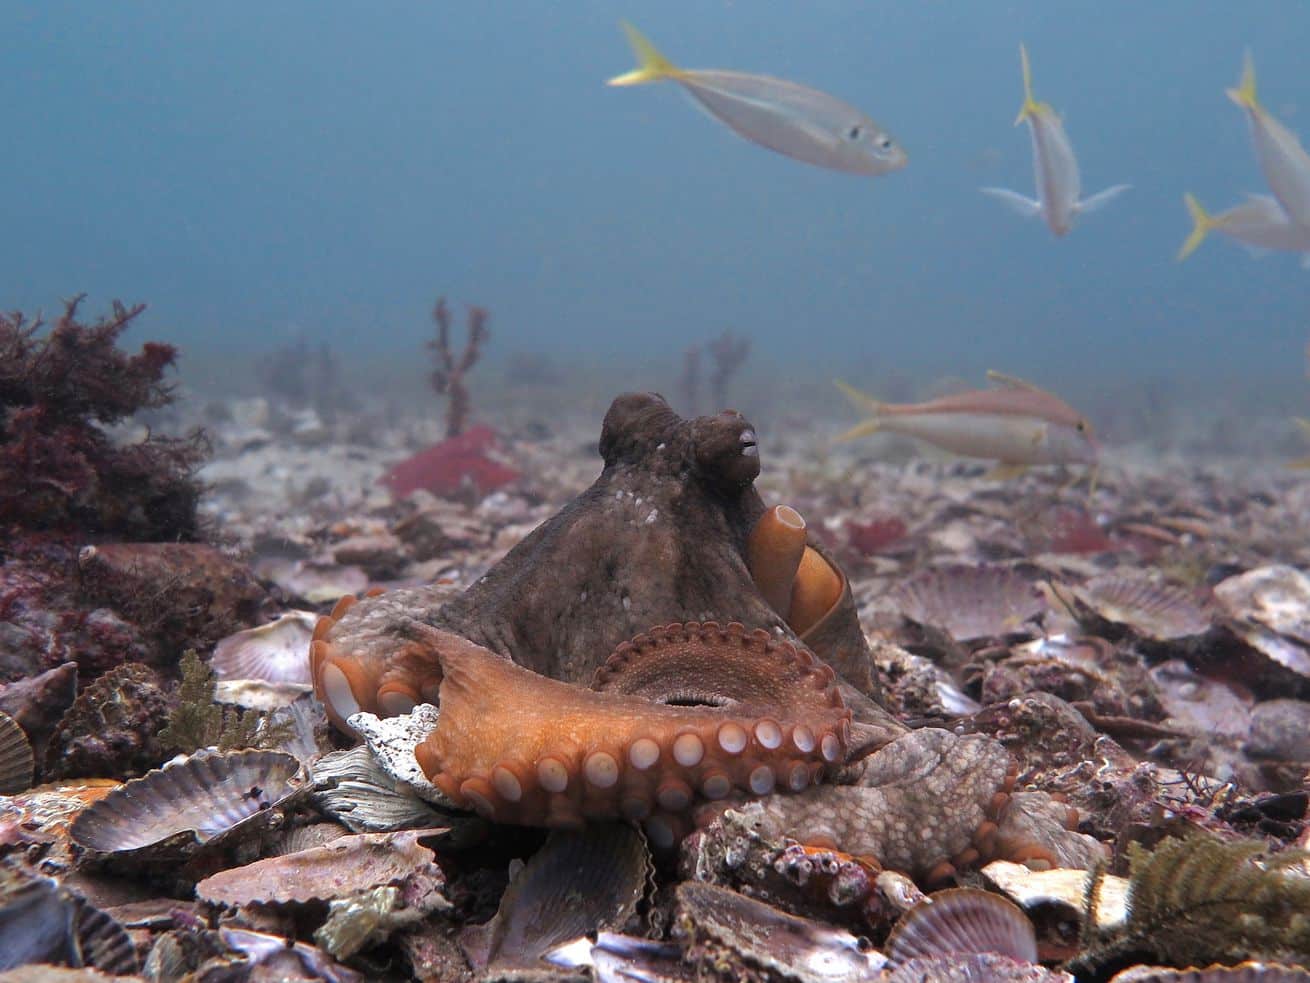 Why are these octopuses hurling shells at each other?